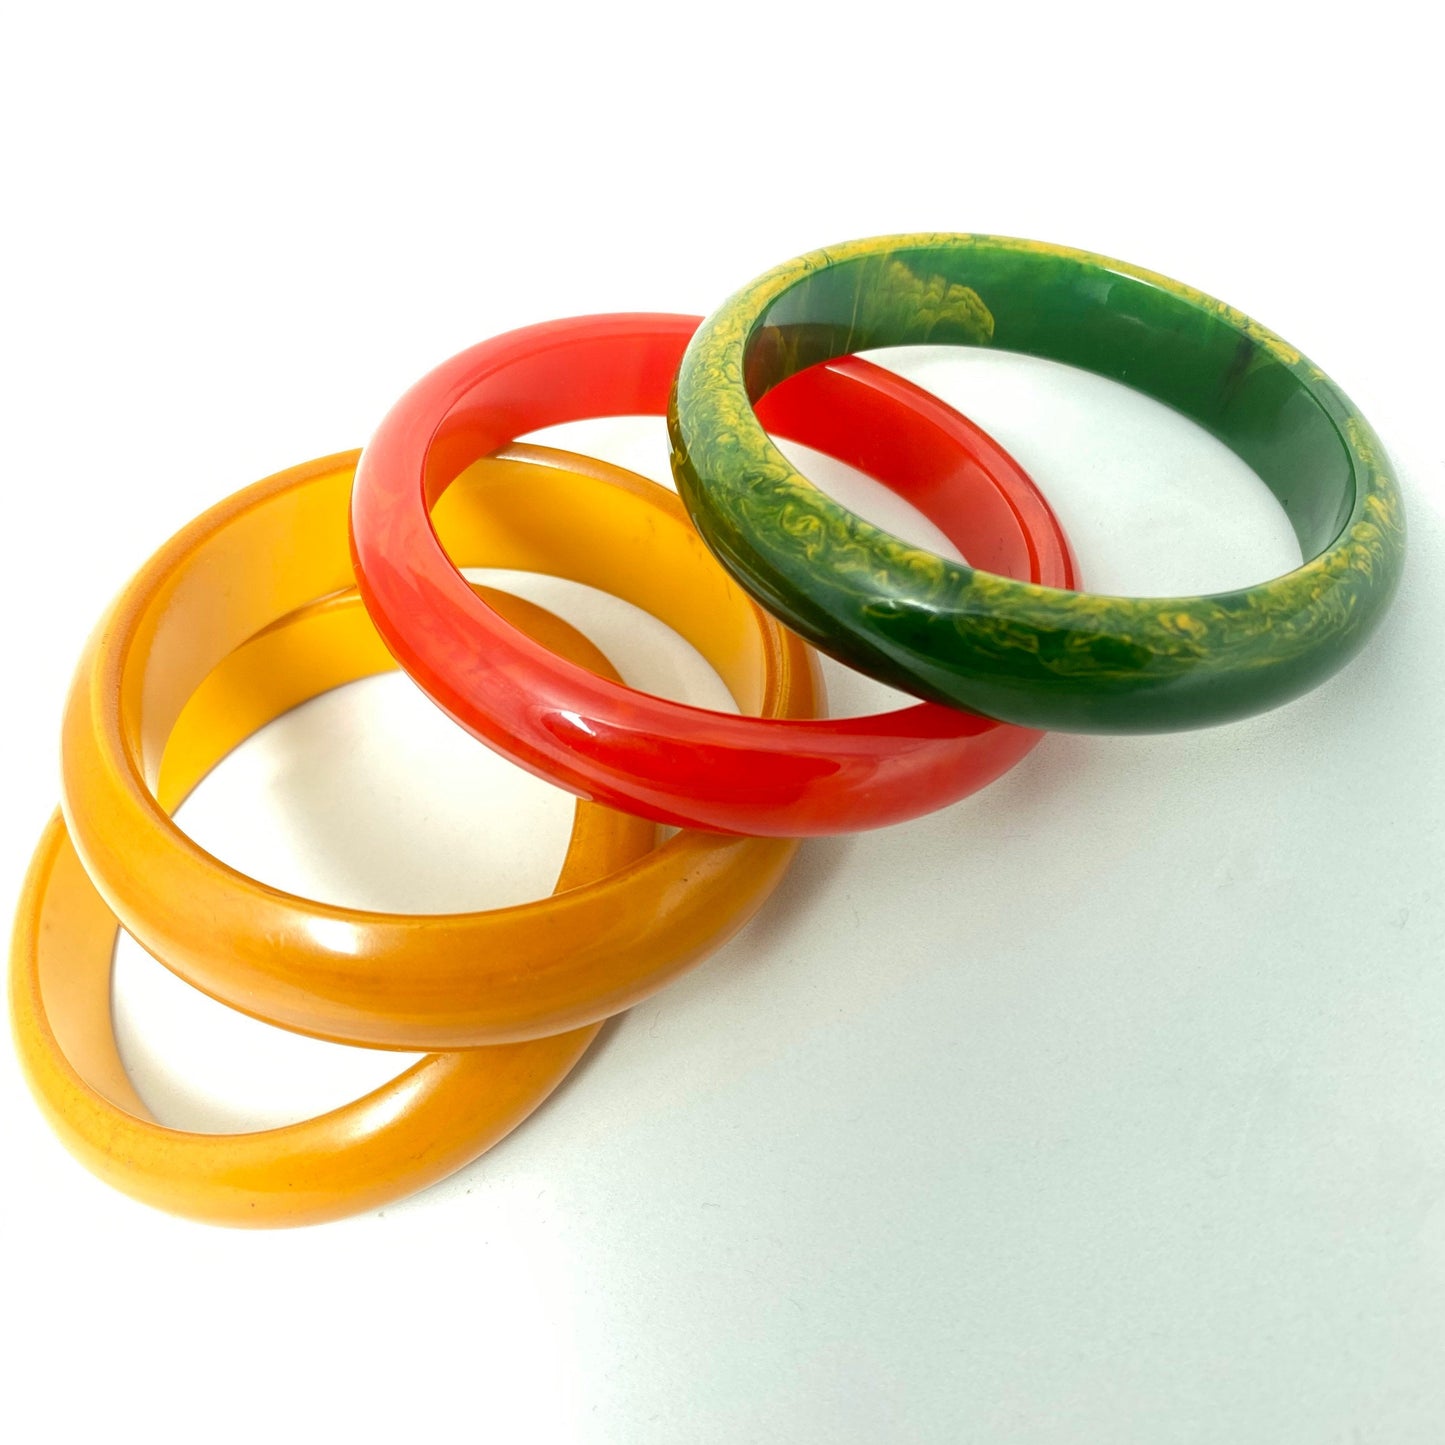 1950s ca plain Bakelite bangle bracelets, coming in a variety of colors in mint condition.